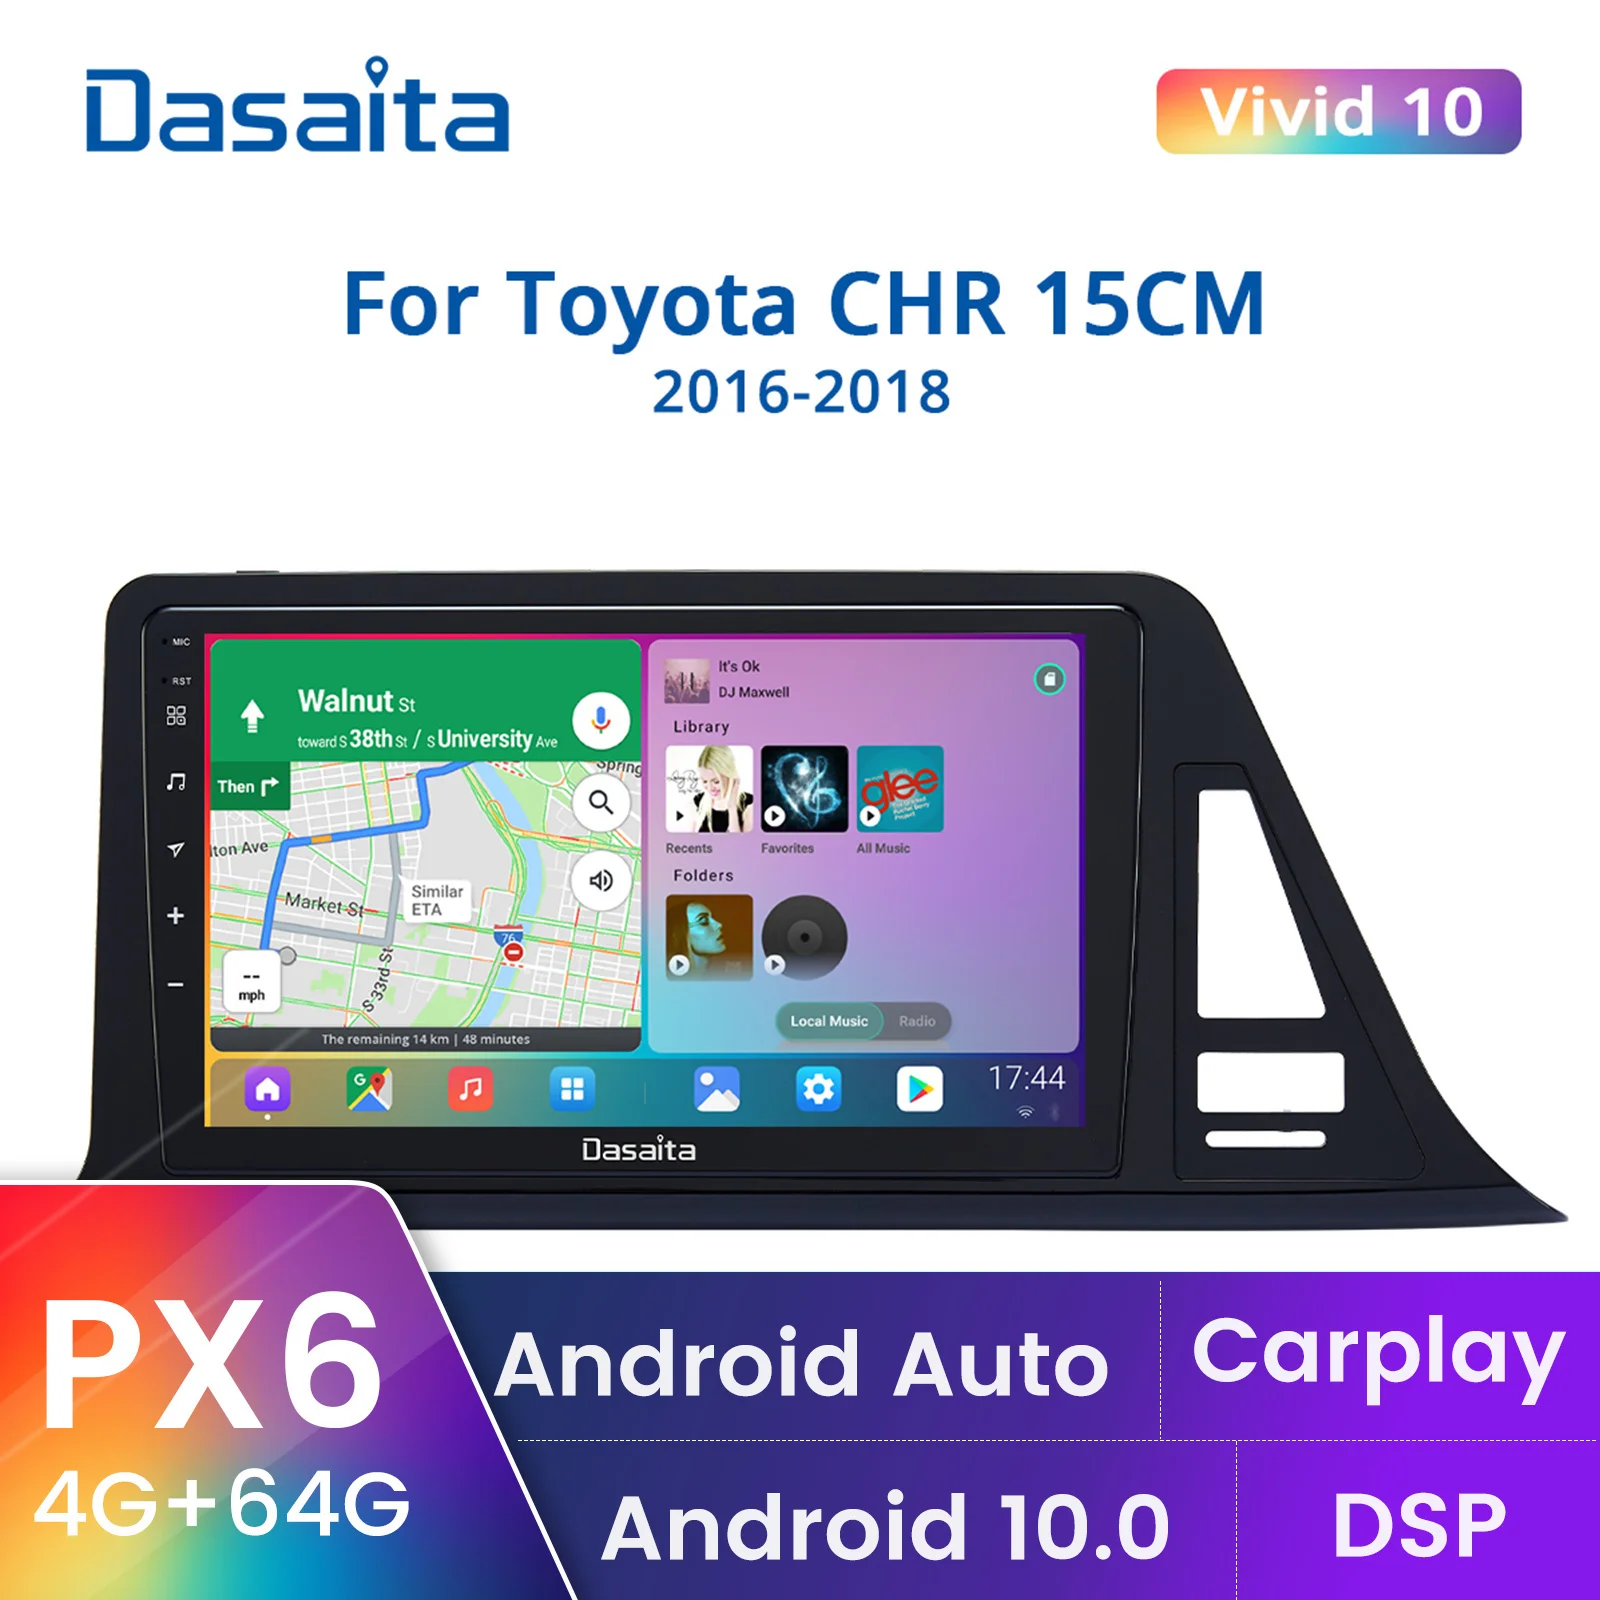 

Dasaita For Toyota CHR 15CM Europe version Car stereo android Apple Carplay Android Auto 4G 64G GPS IPS DSP 1280*720